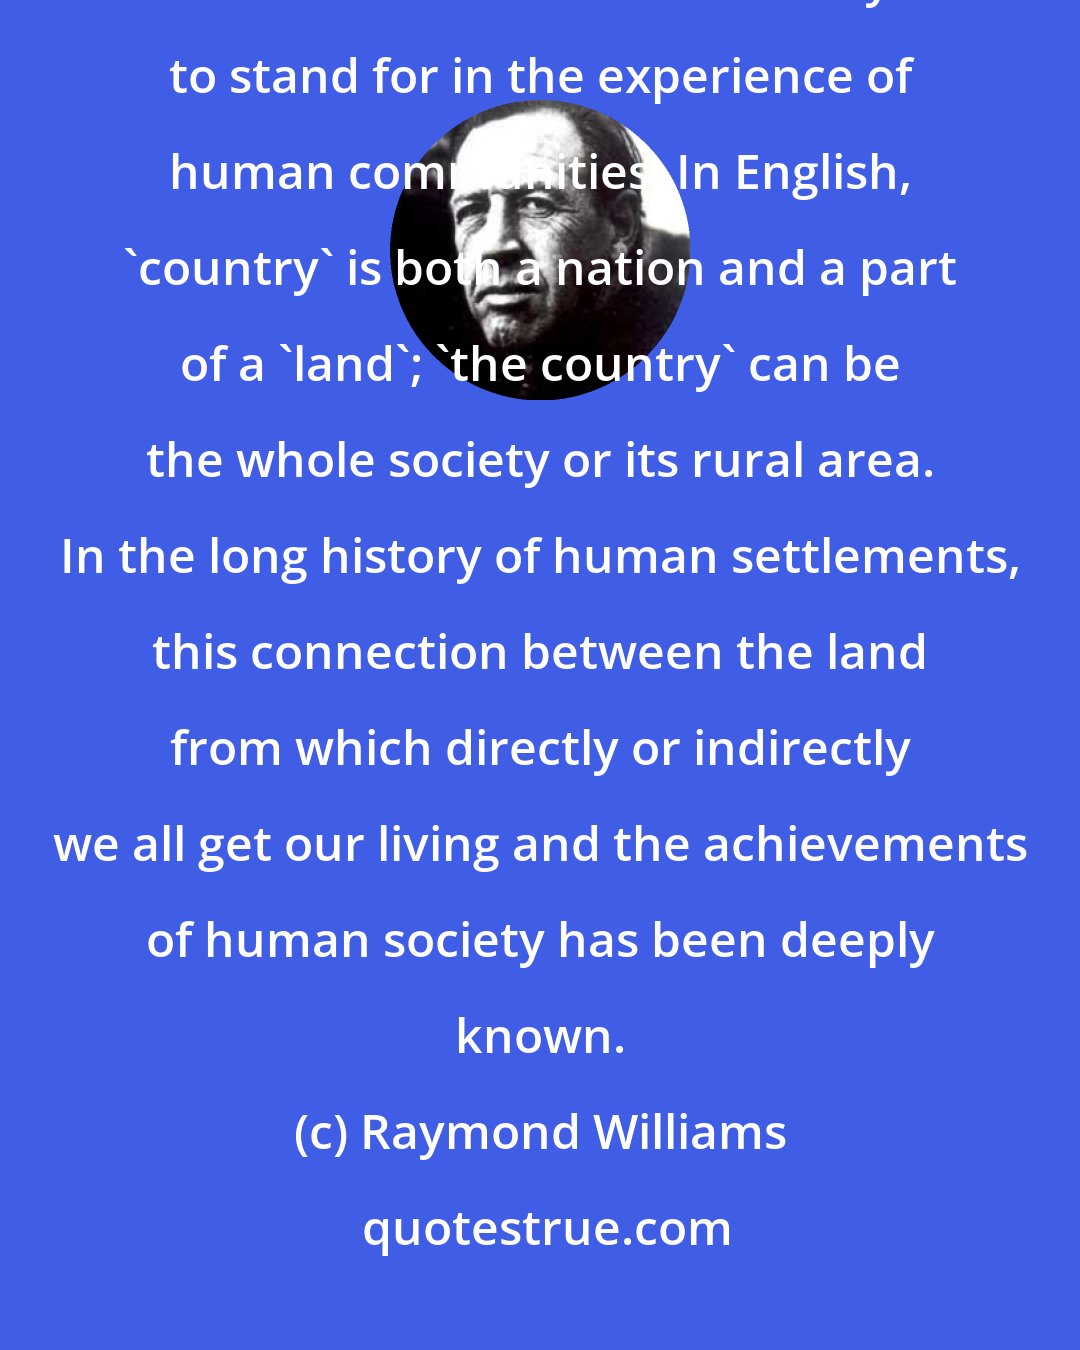 Raymond Williams: Country' and 'city' are very powerful words, and this is not surprising when we remember how much they seem to stand for in the experience of human communities. In English, 'country' is both a nation and a part of a 'land'; 'the country' can be the whole society or its rural area. In the long history of human settlements, this connection between the land from which directly or indirectly we all get our living and the achievements of human society has been deeply known.